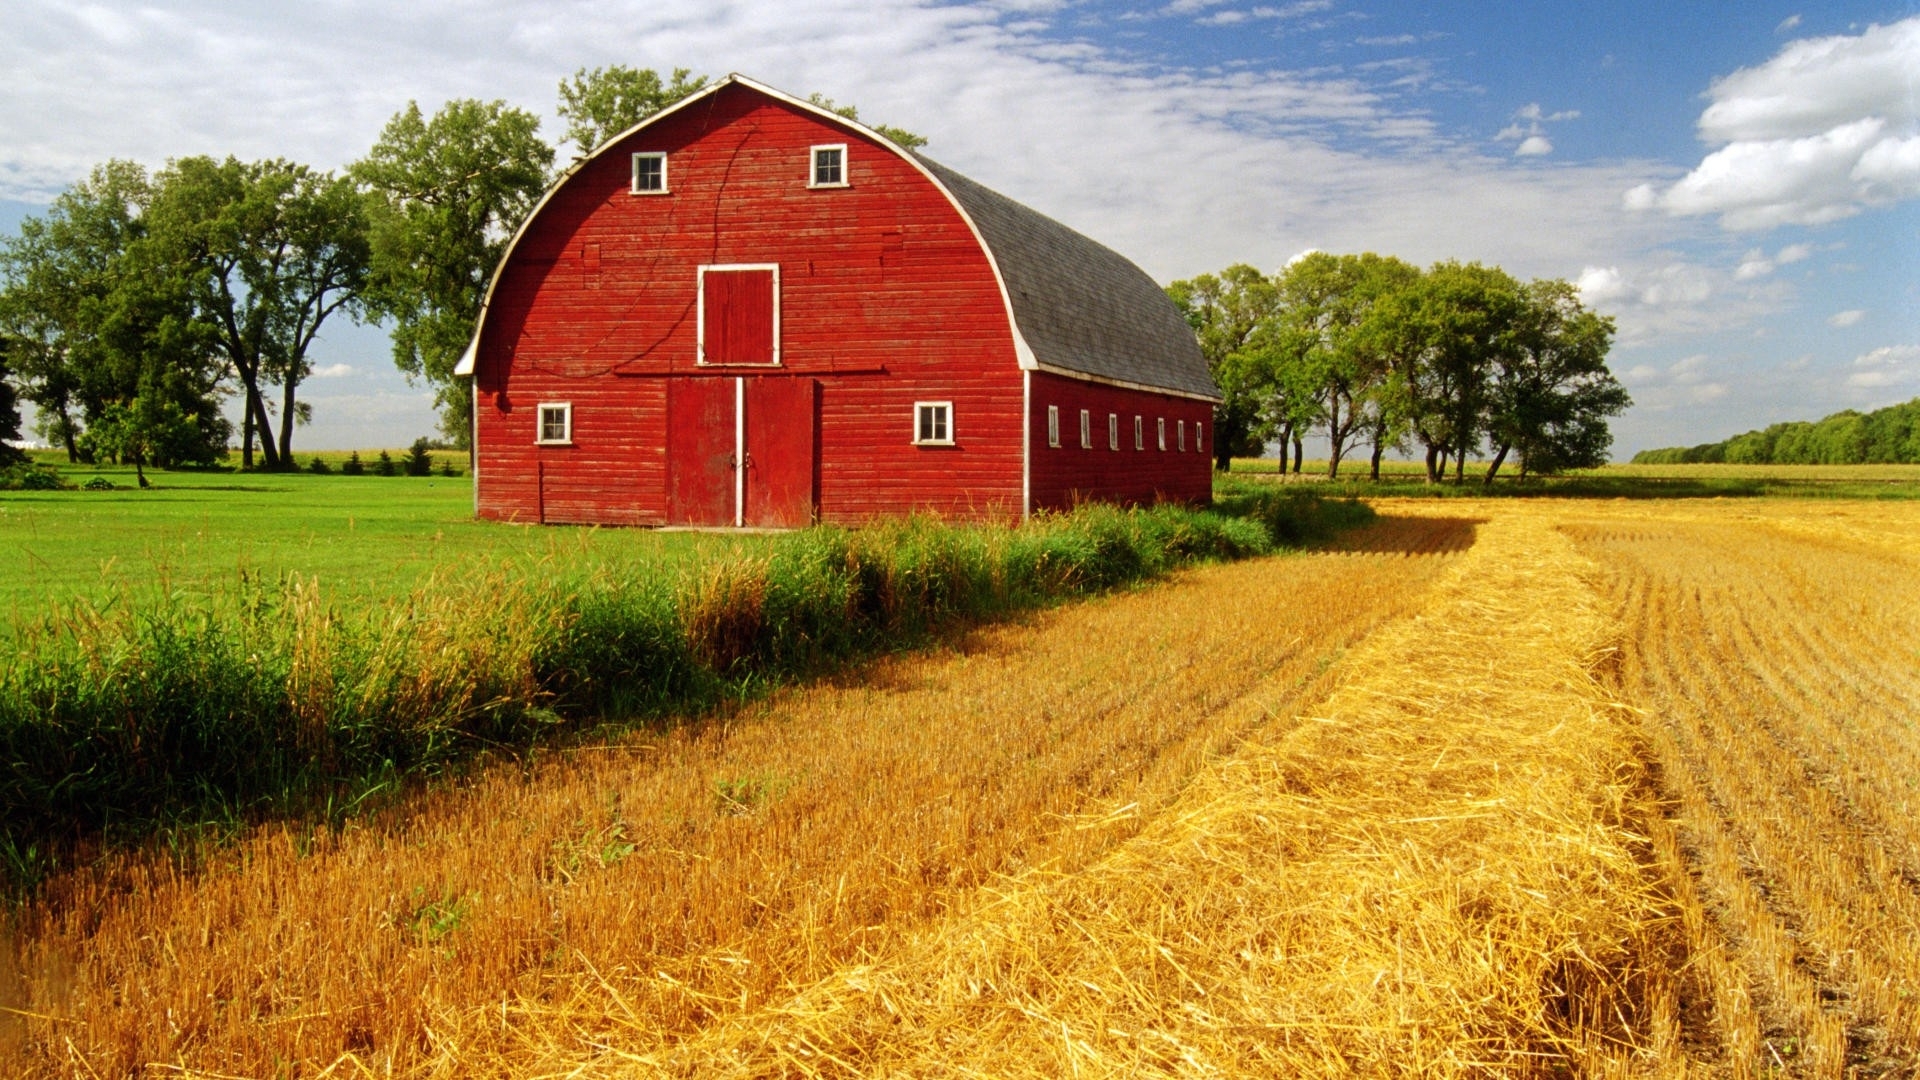 Nice Images Collection: Farm Desktop Wallpapers